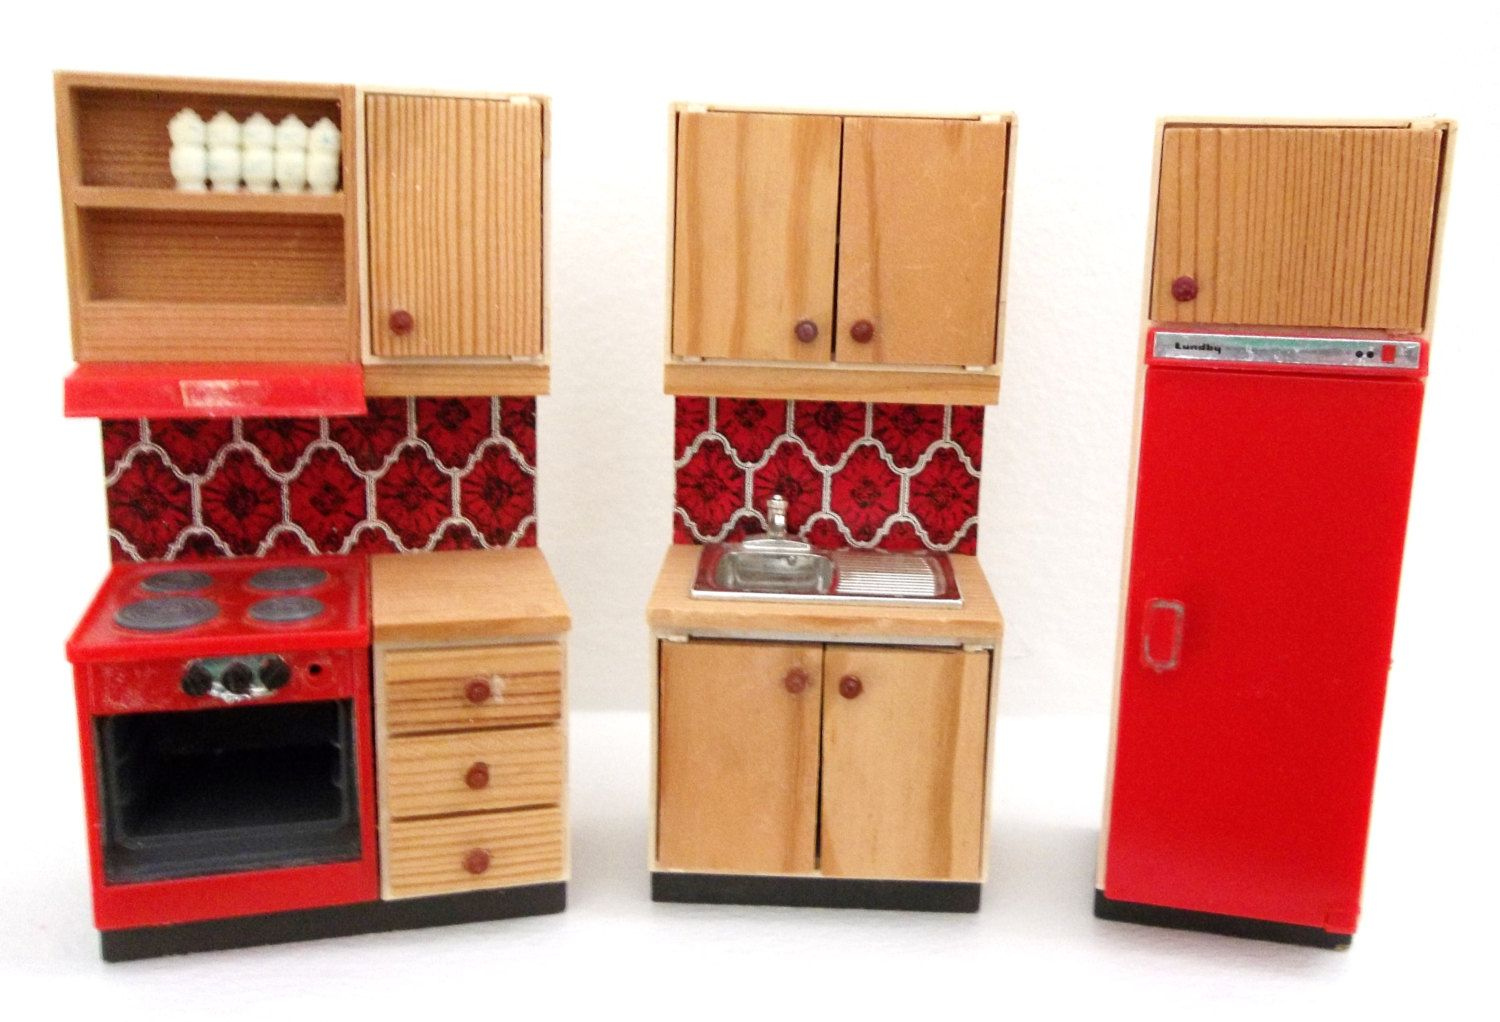 Vintage Lundby Wooden Dollhouse Kitchen Set With Red Tile Etsy In 